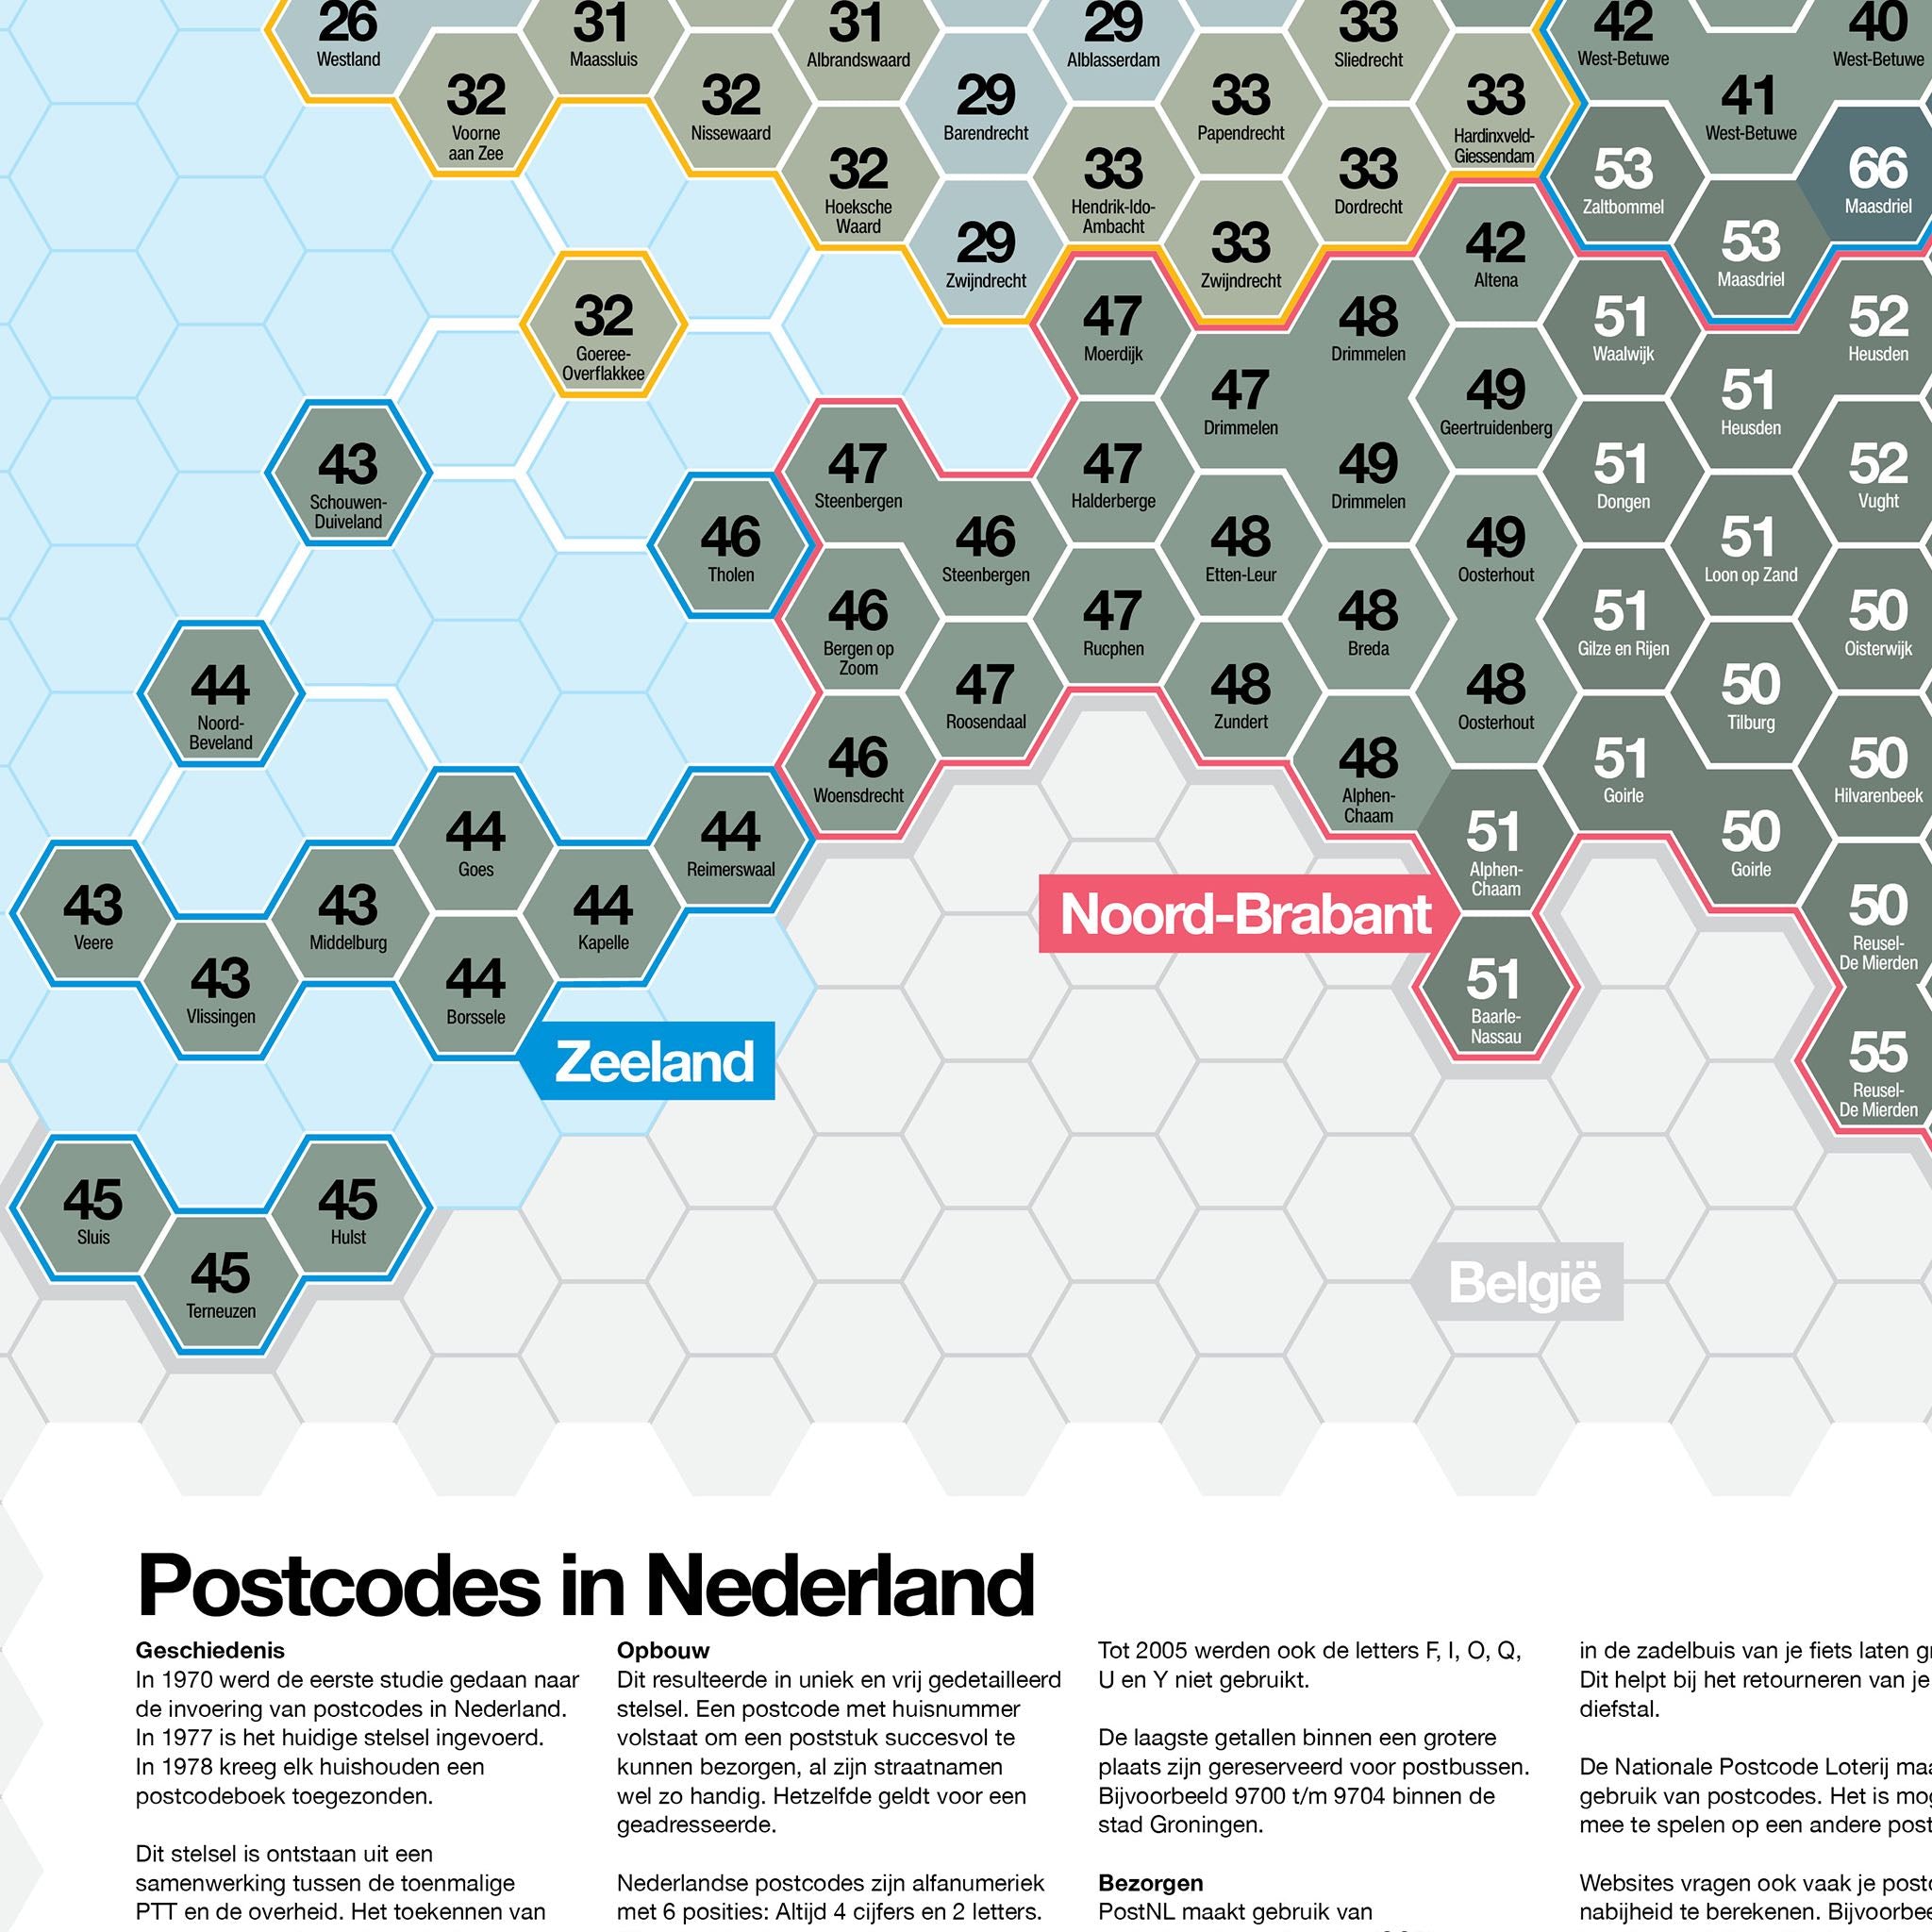 Postcode Map of the Netherlands